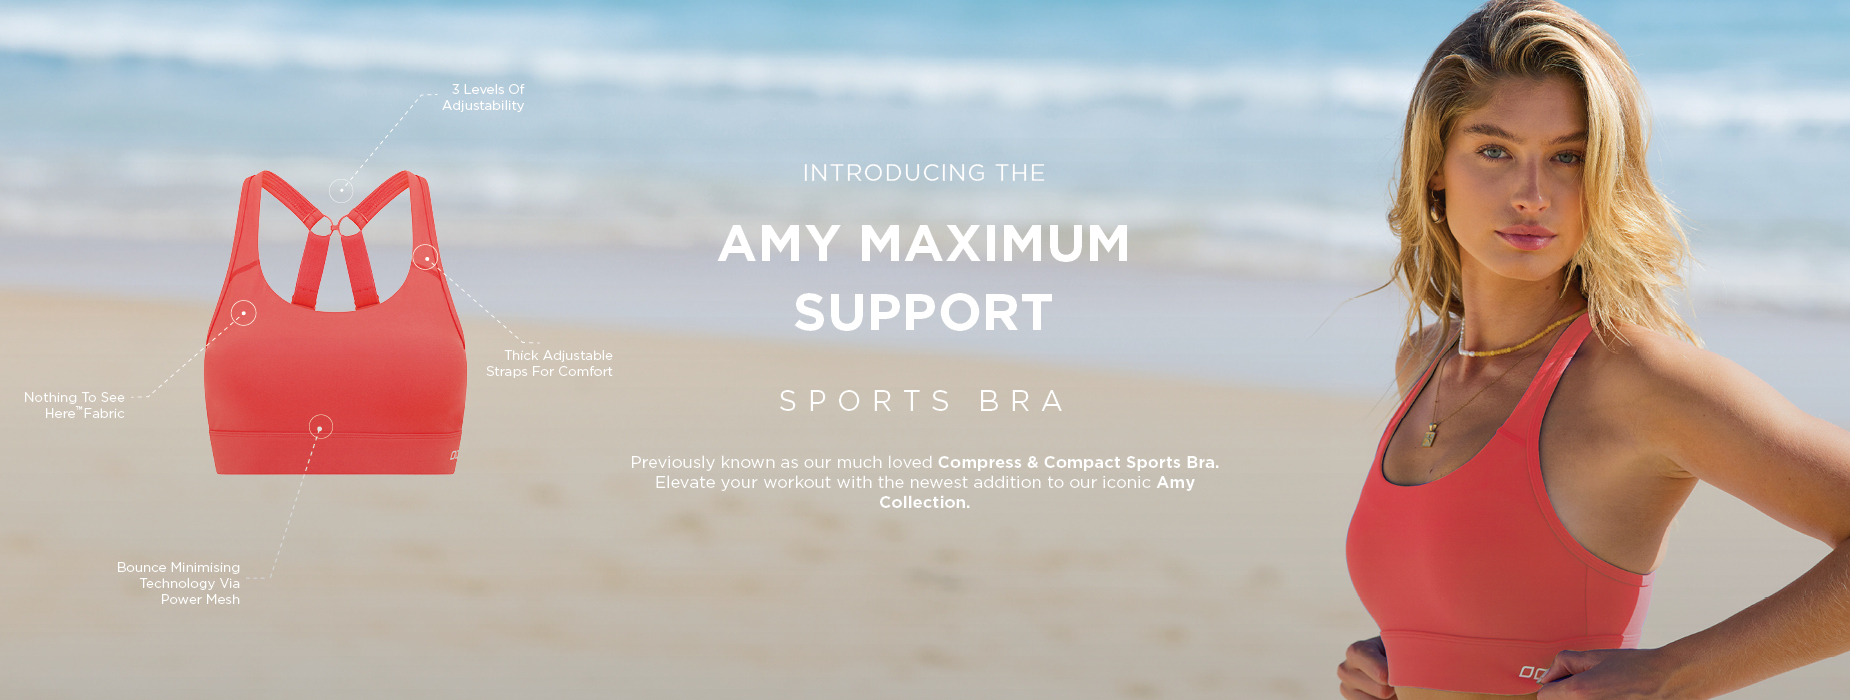 Introducing the Amy Maximum Support Sports Bra. Previously known as our much loved Amy Maximum Support Bra. Elevate your workout with the newest addition to our iconic Amy Collection.